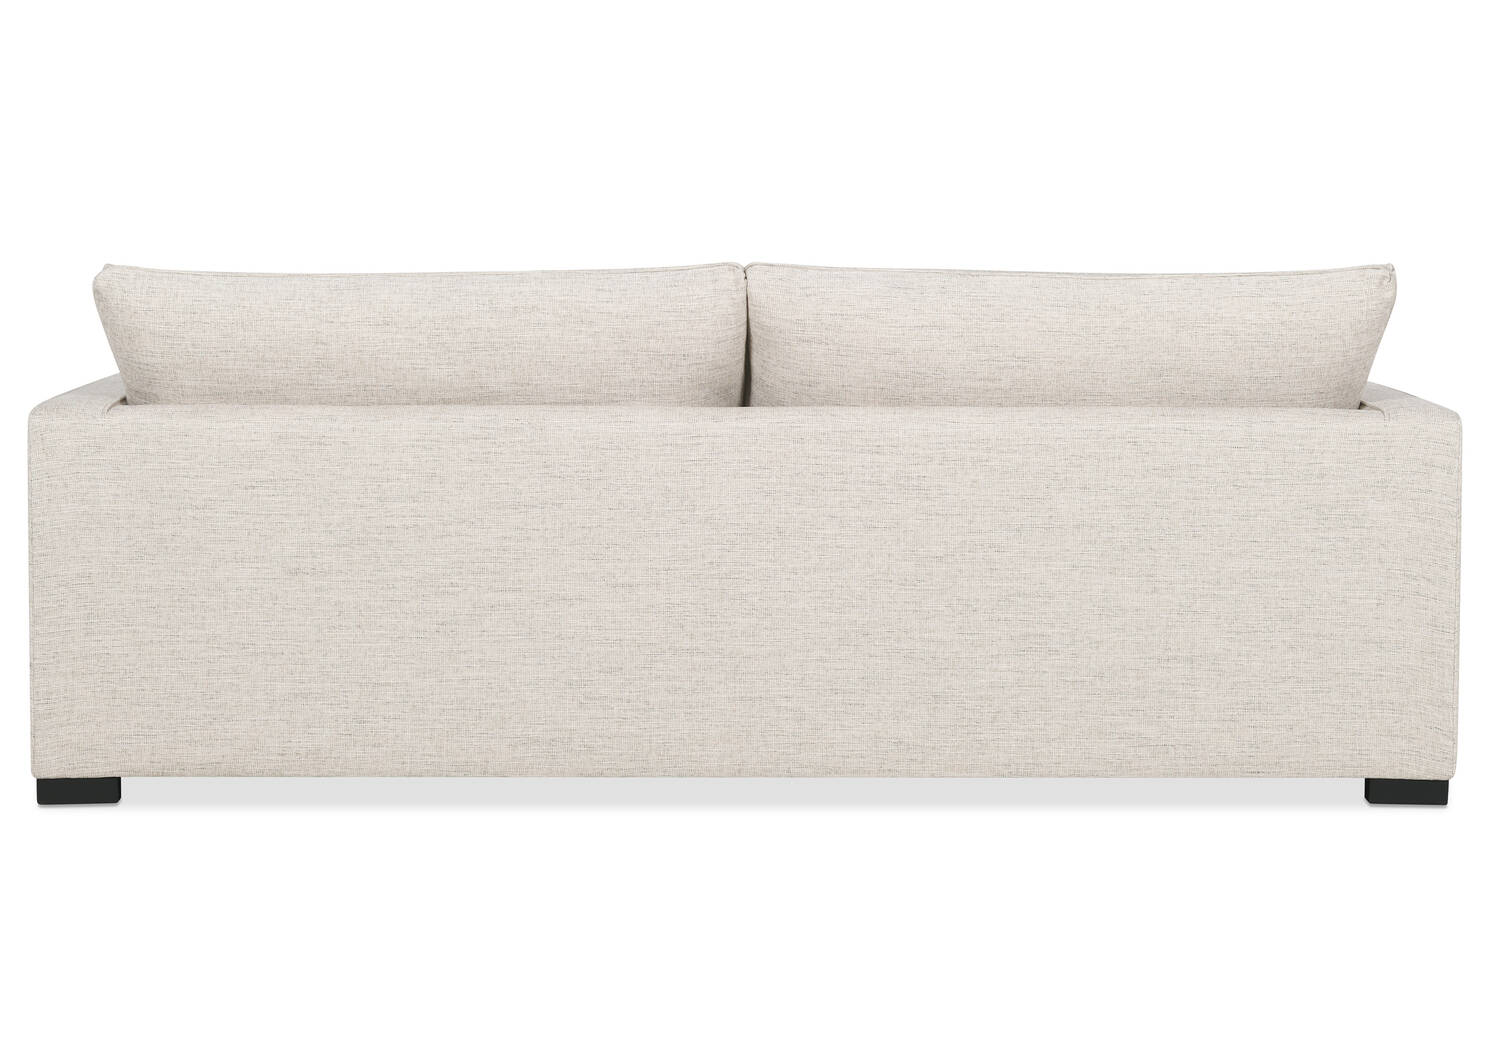 Sibley Sofa Chaise -Wesley Linen